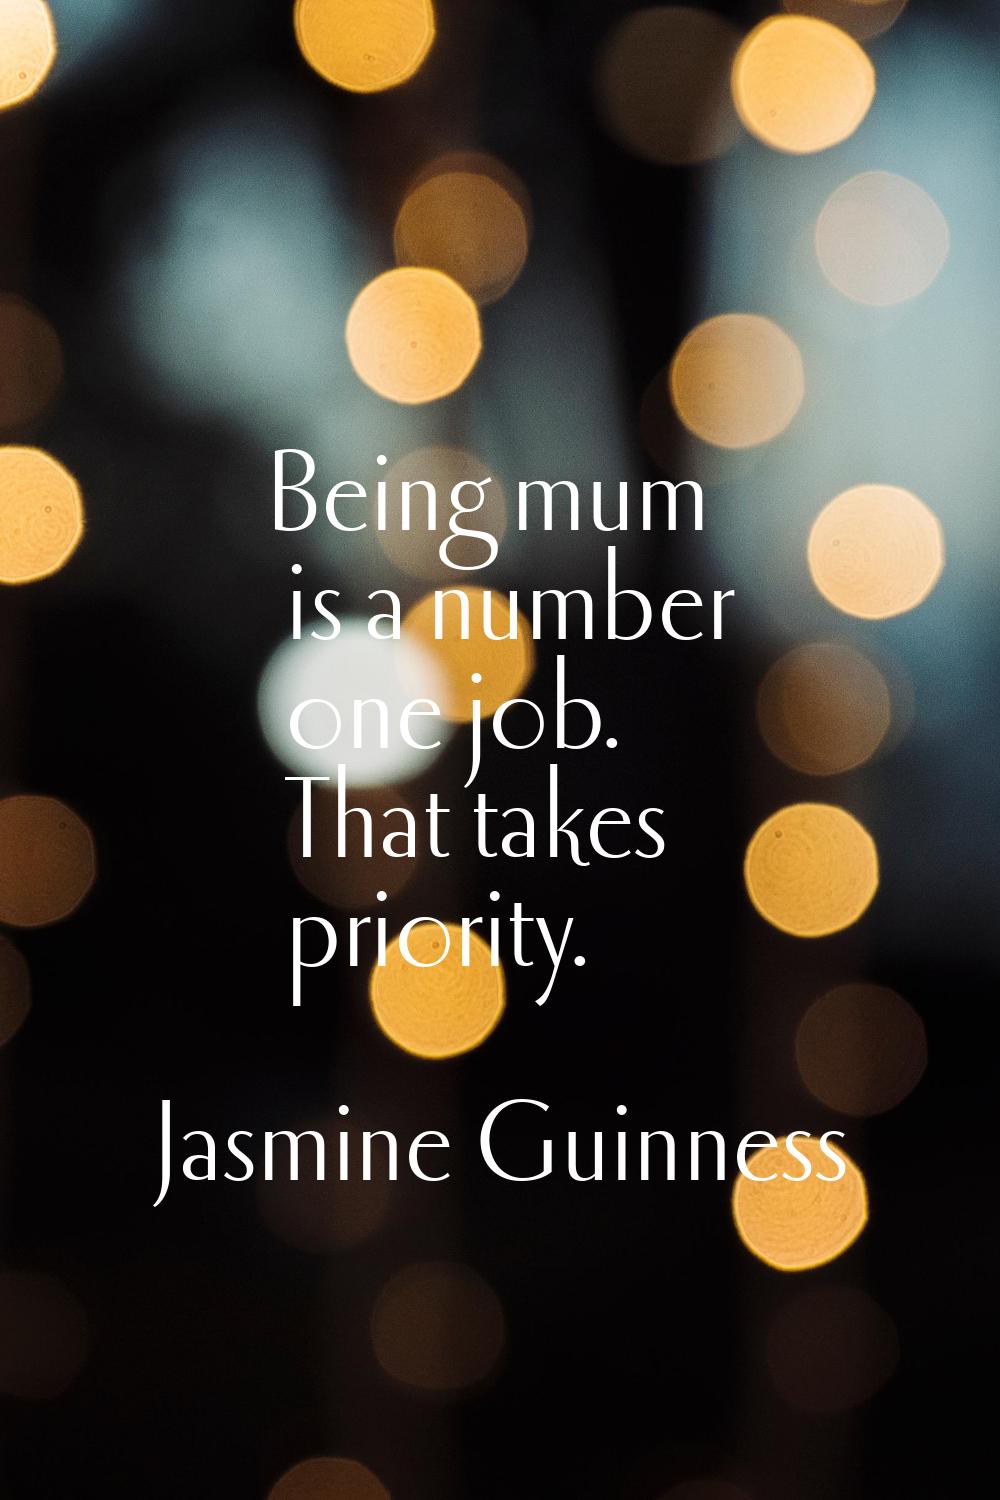 Being mum is a number one job. That takes priority.